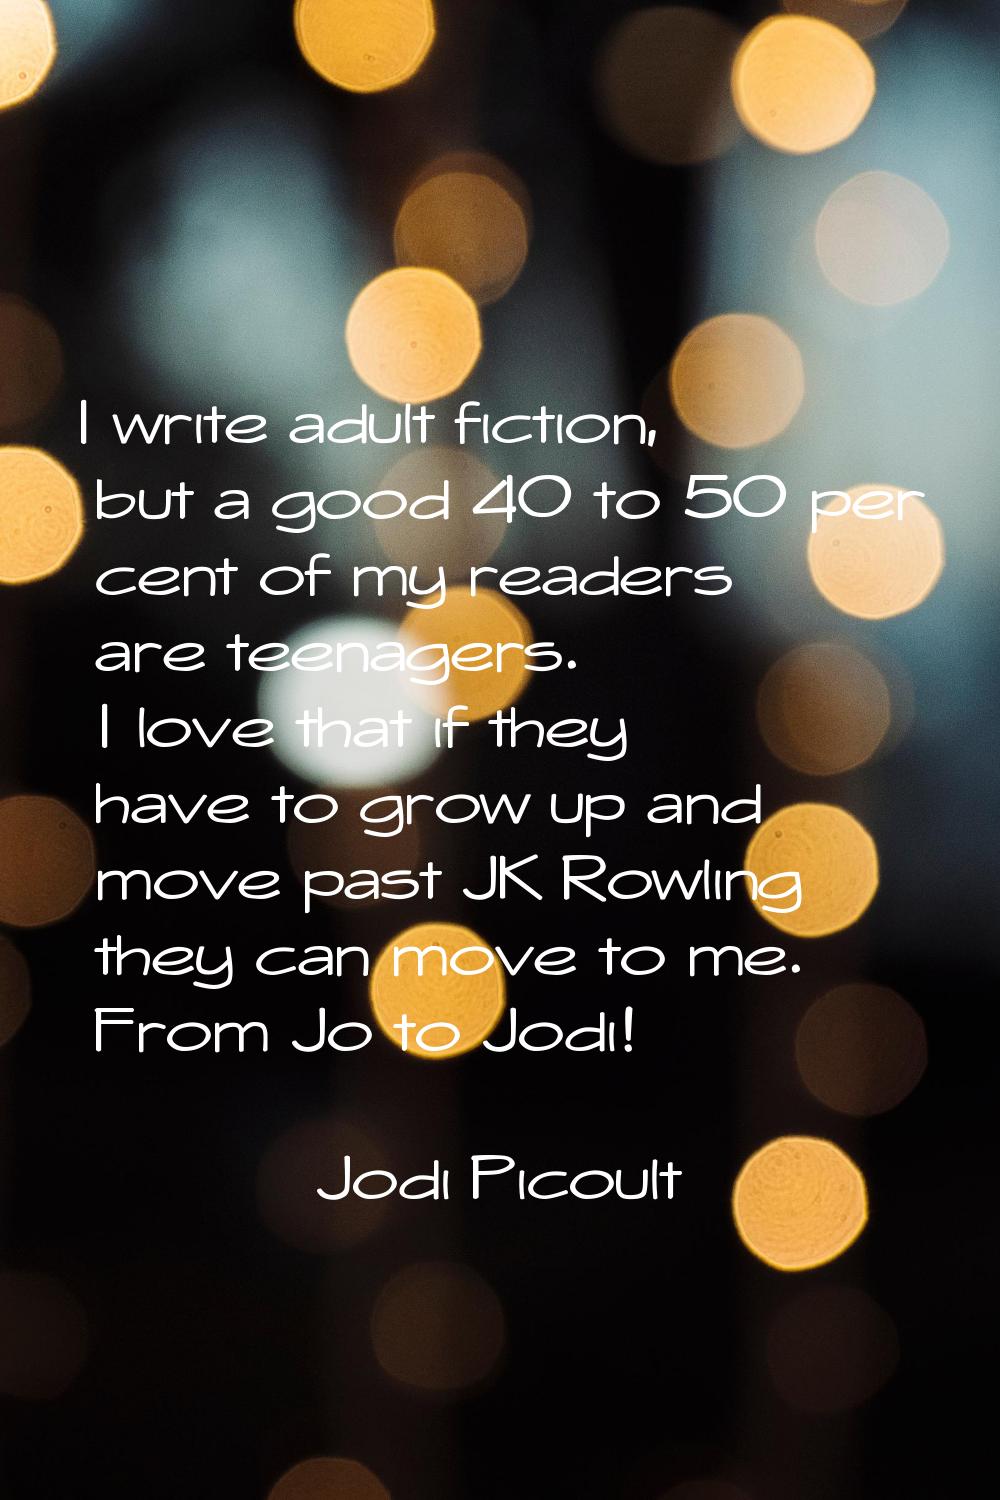 I write adult fiction, but a good 40 to 50 per cent of my readers are teenagers. I love that if the